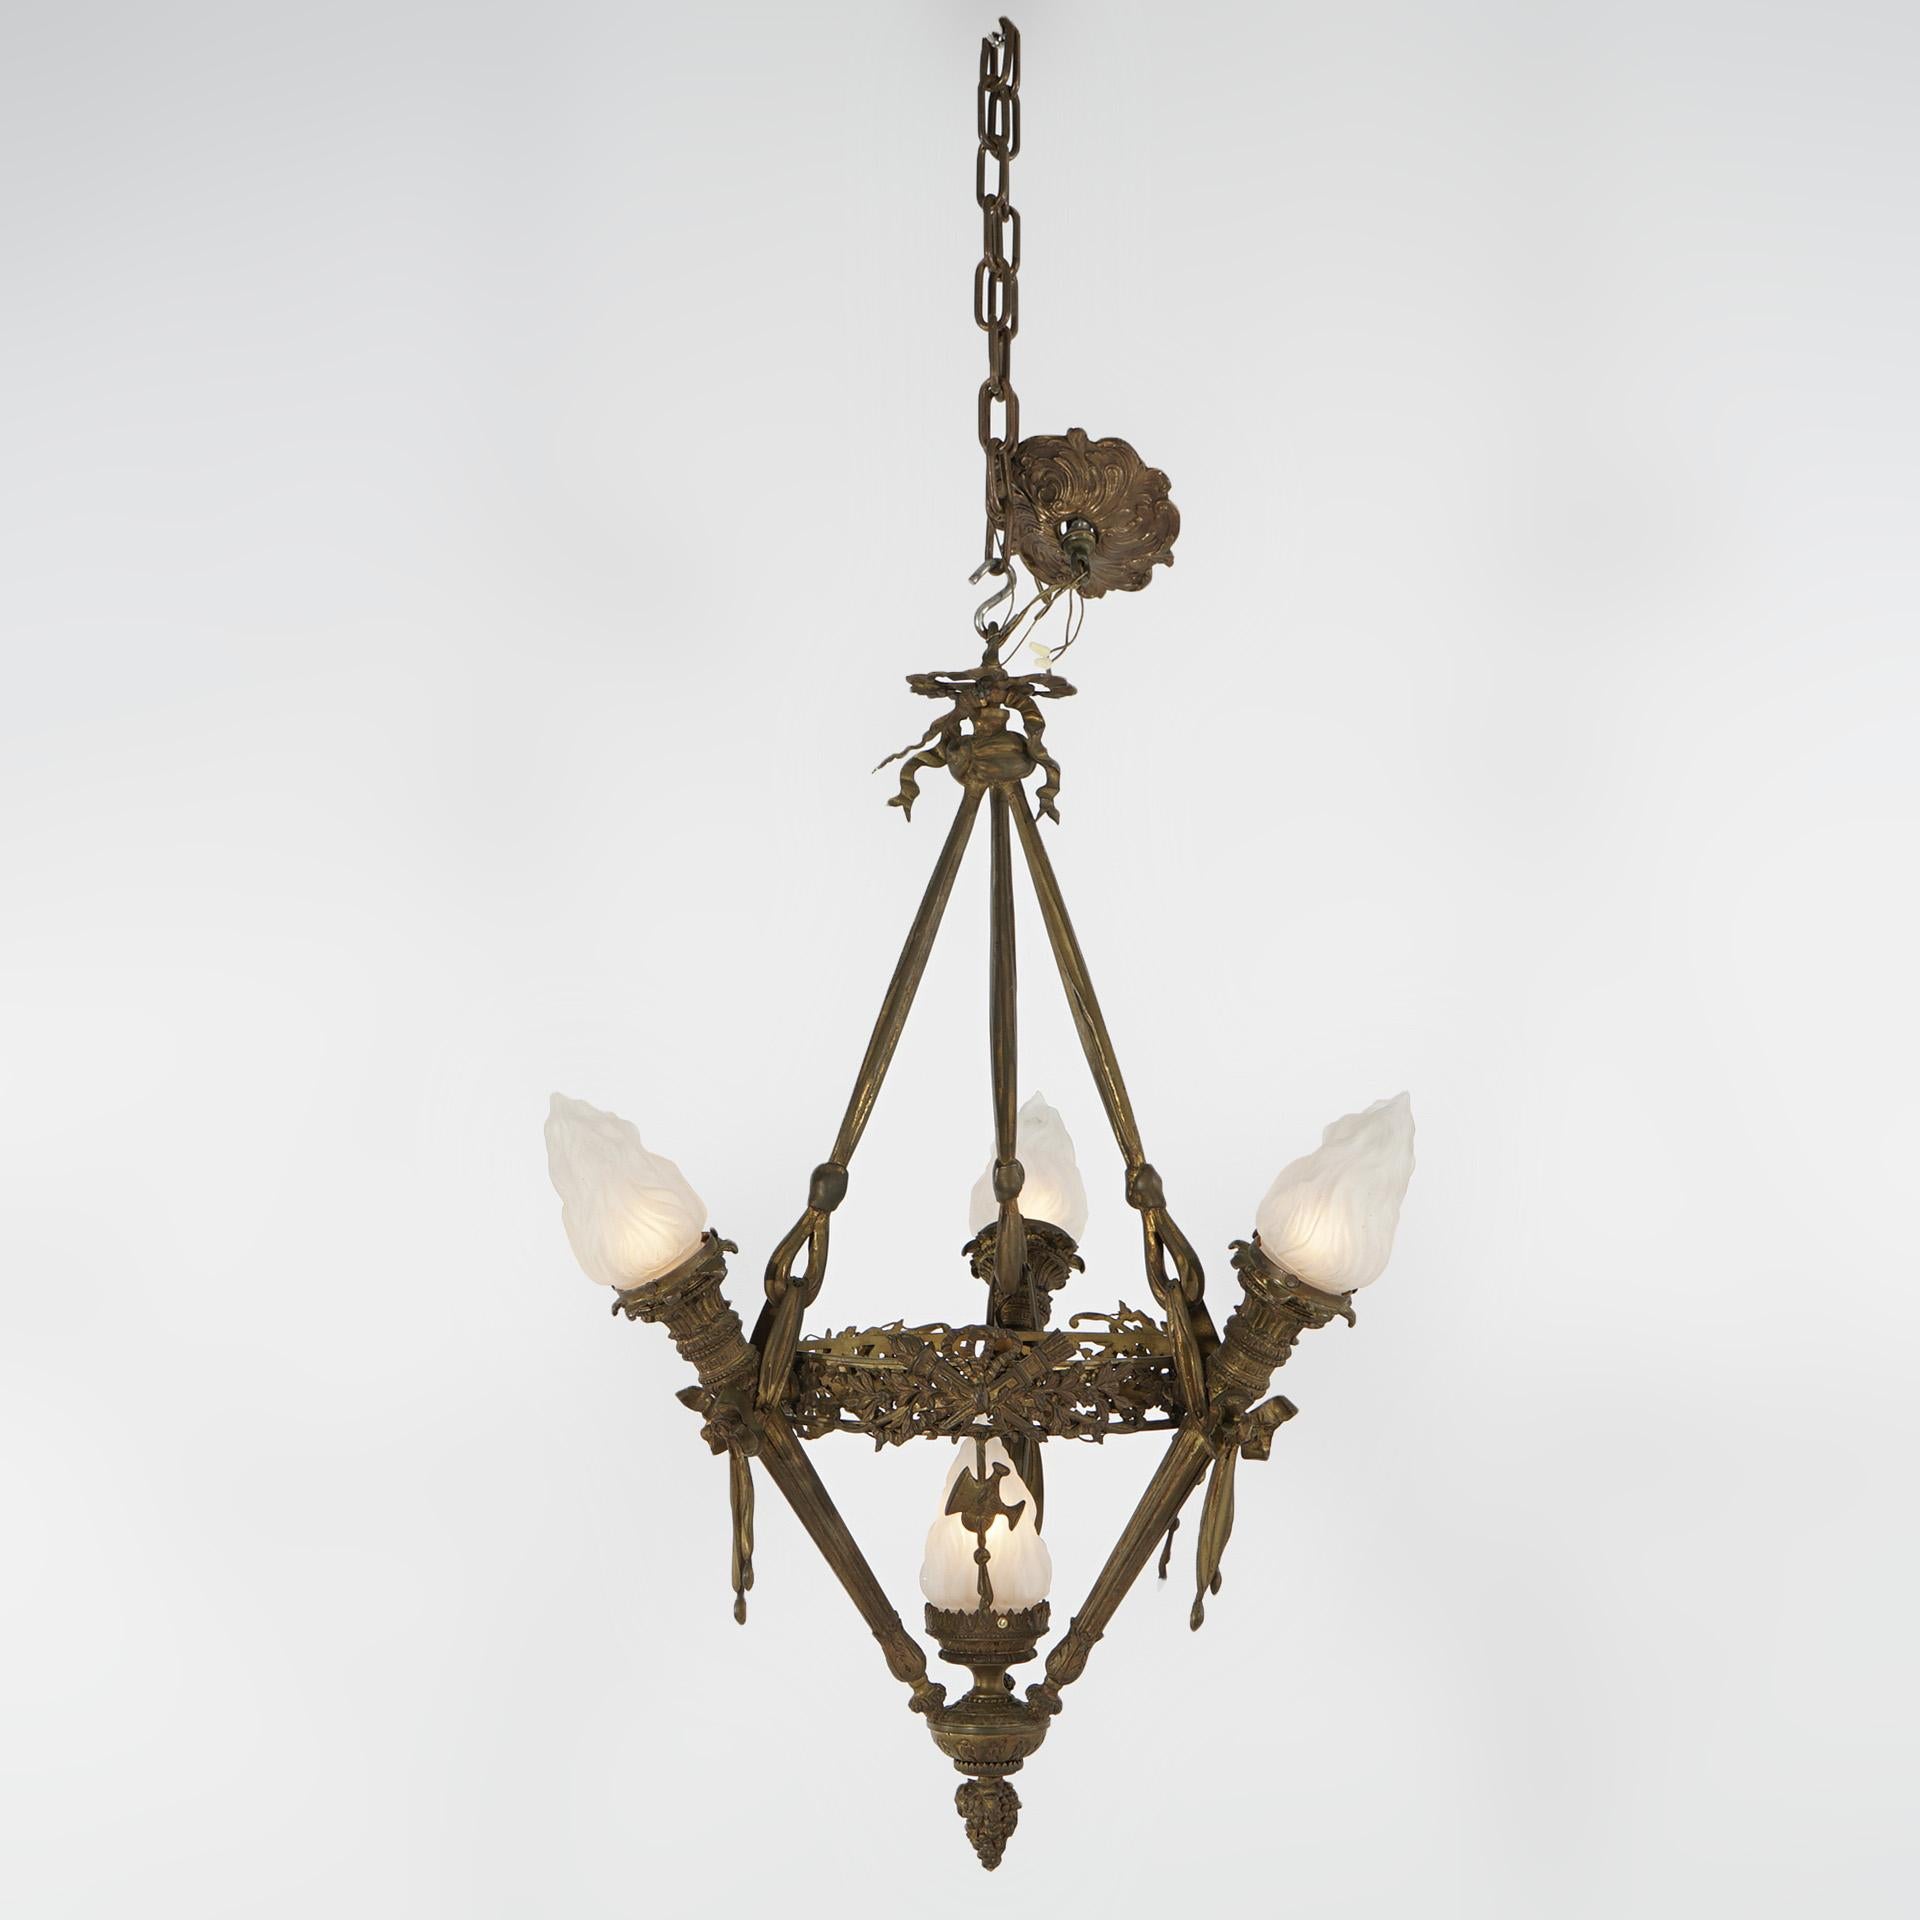 Gothic Revival Antique Gilt Bronze French Empire Figural Four Light Torch Hanging Fixture C1920 For Sale